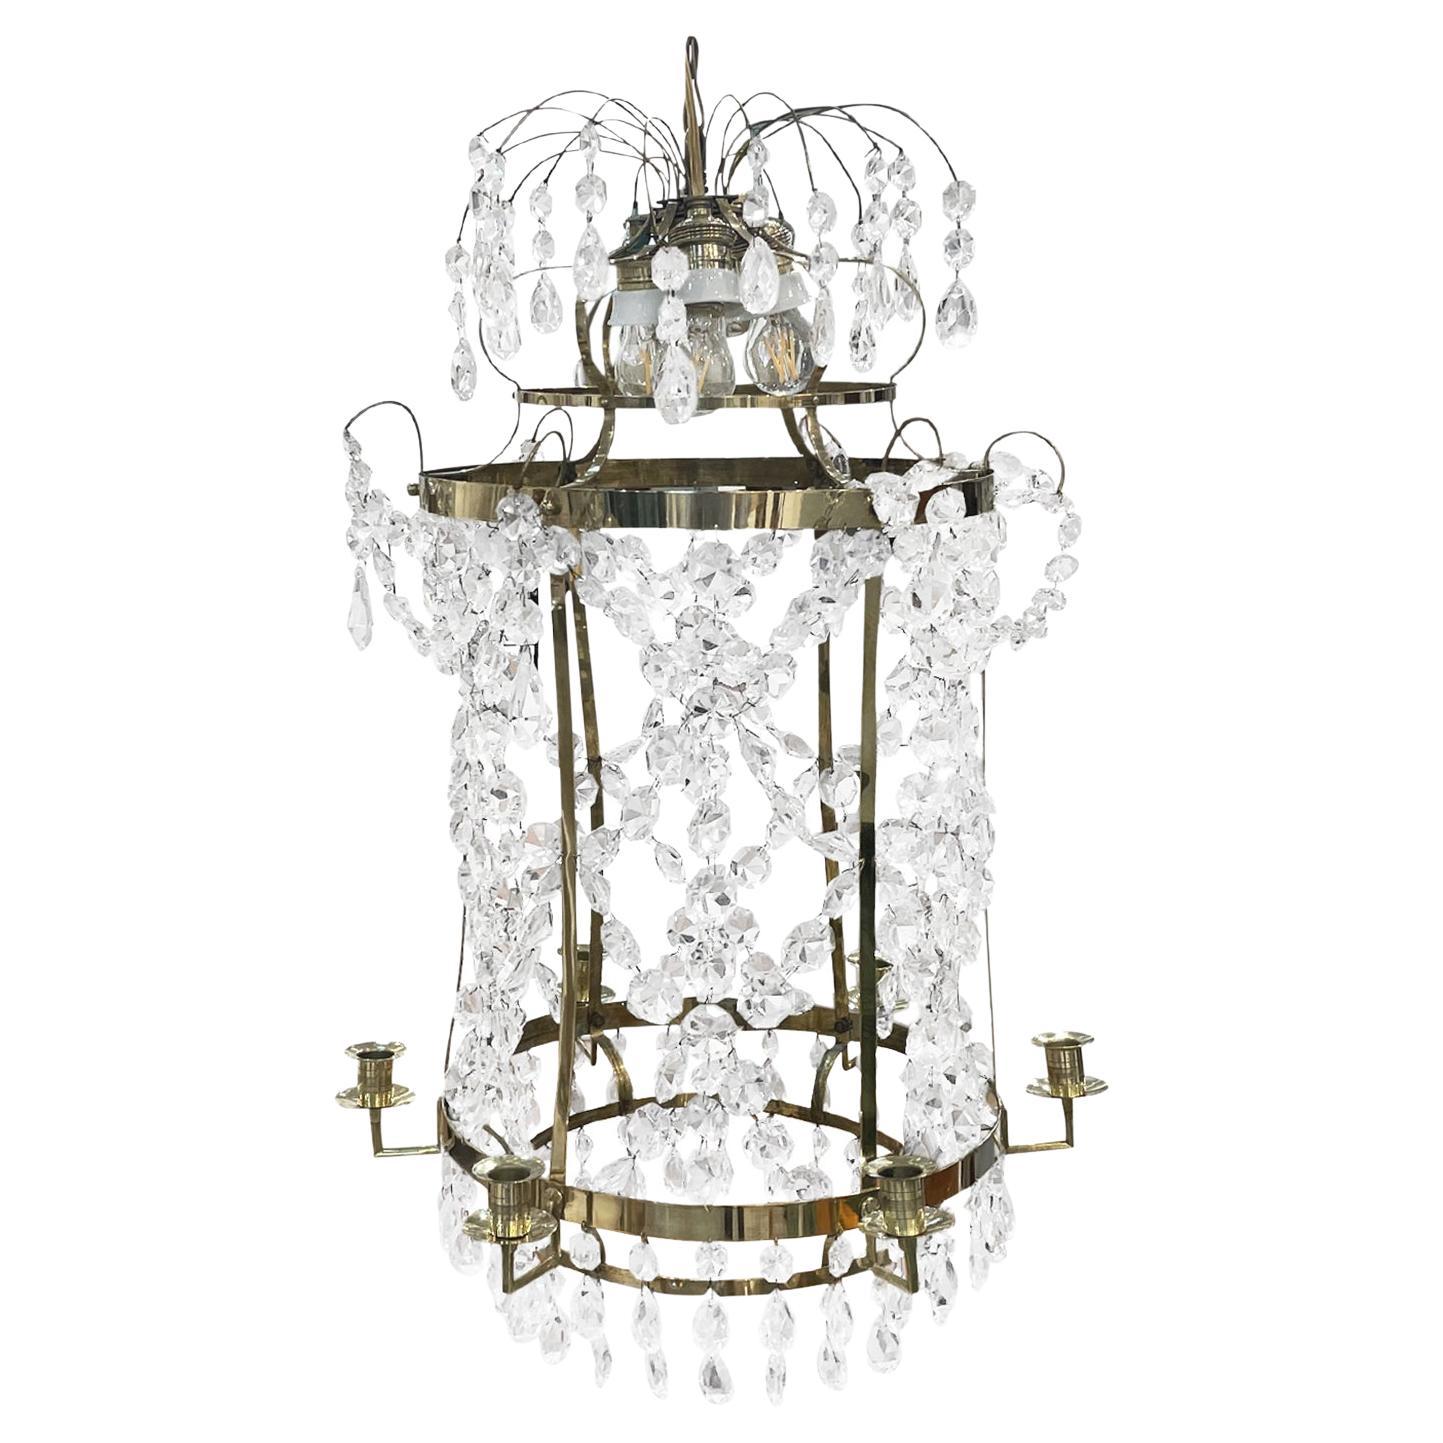 19th Century French Antique Empire Crystal Glass Chandelier, Parisian Candelabra For Sale